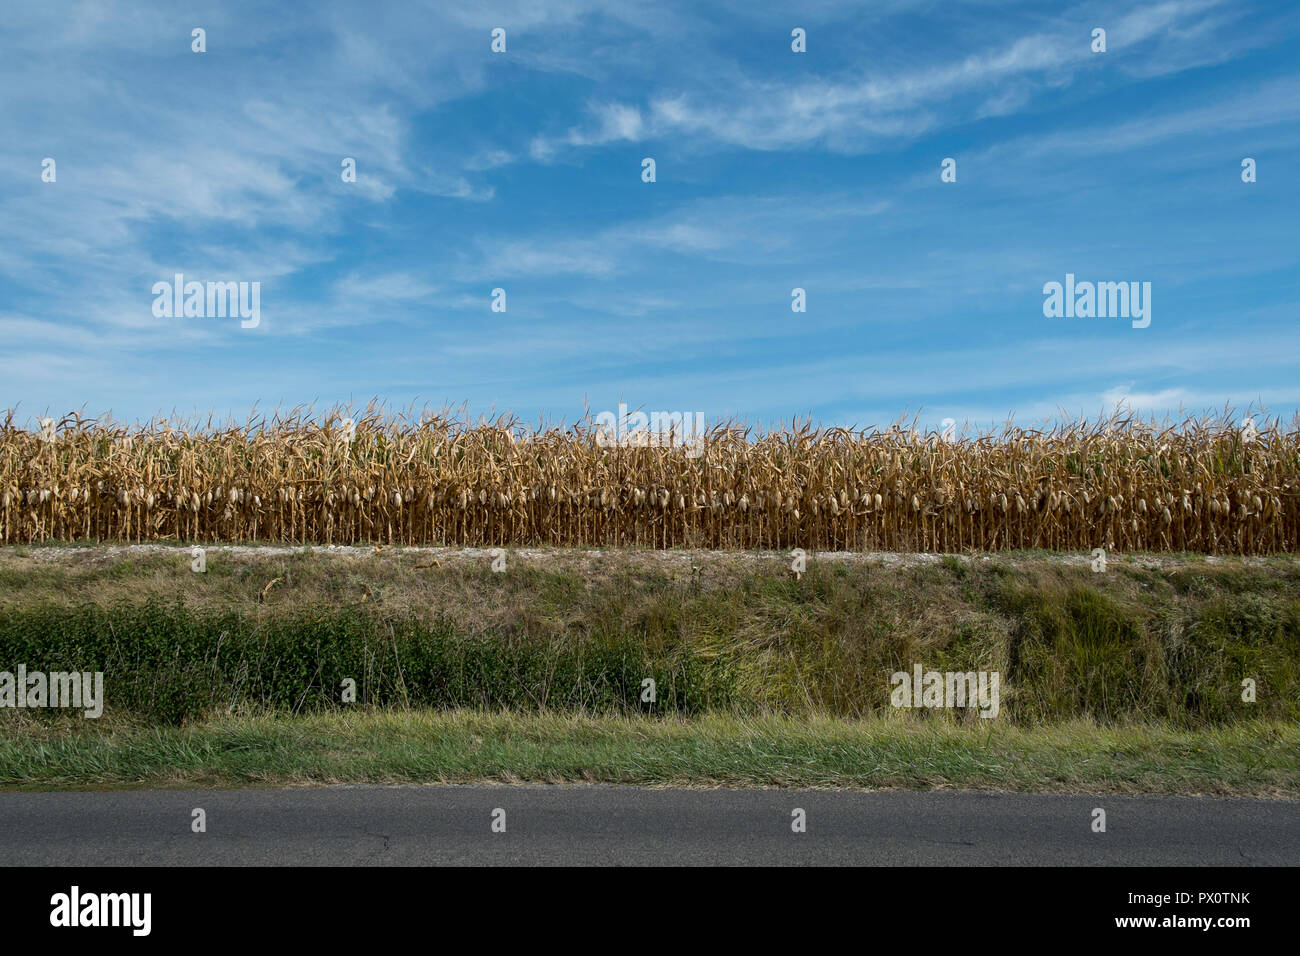 Field of Maize ready for harvesting in the Loire Valley with high bank separating the road. Stock Photo